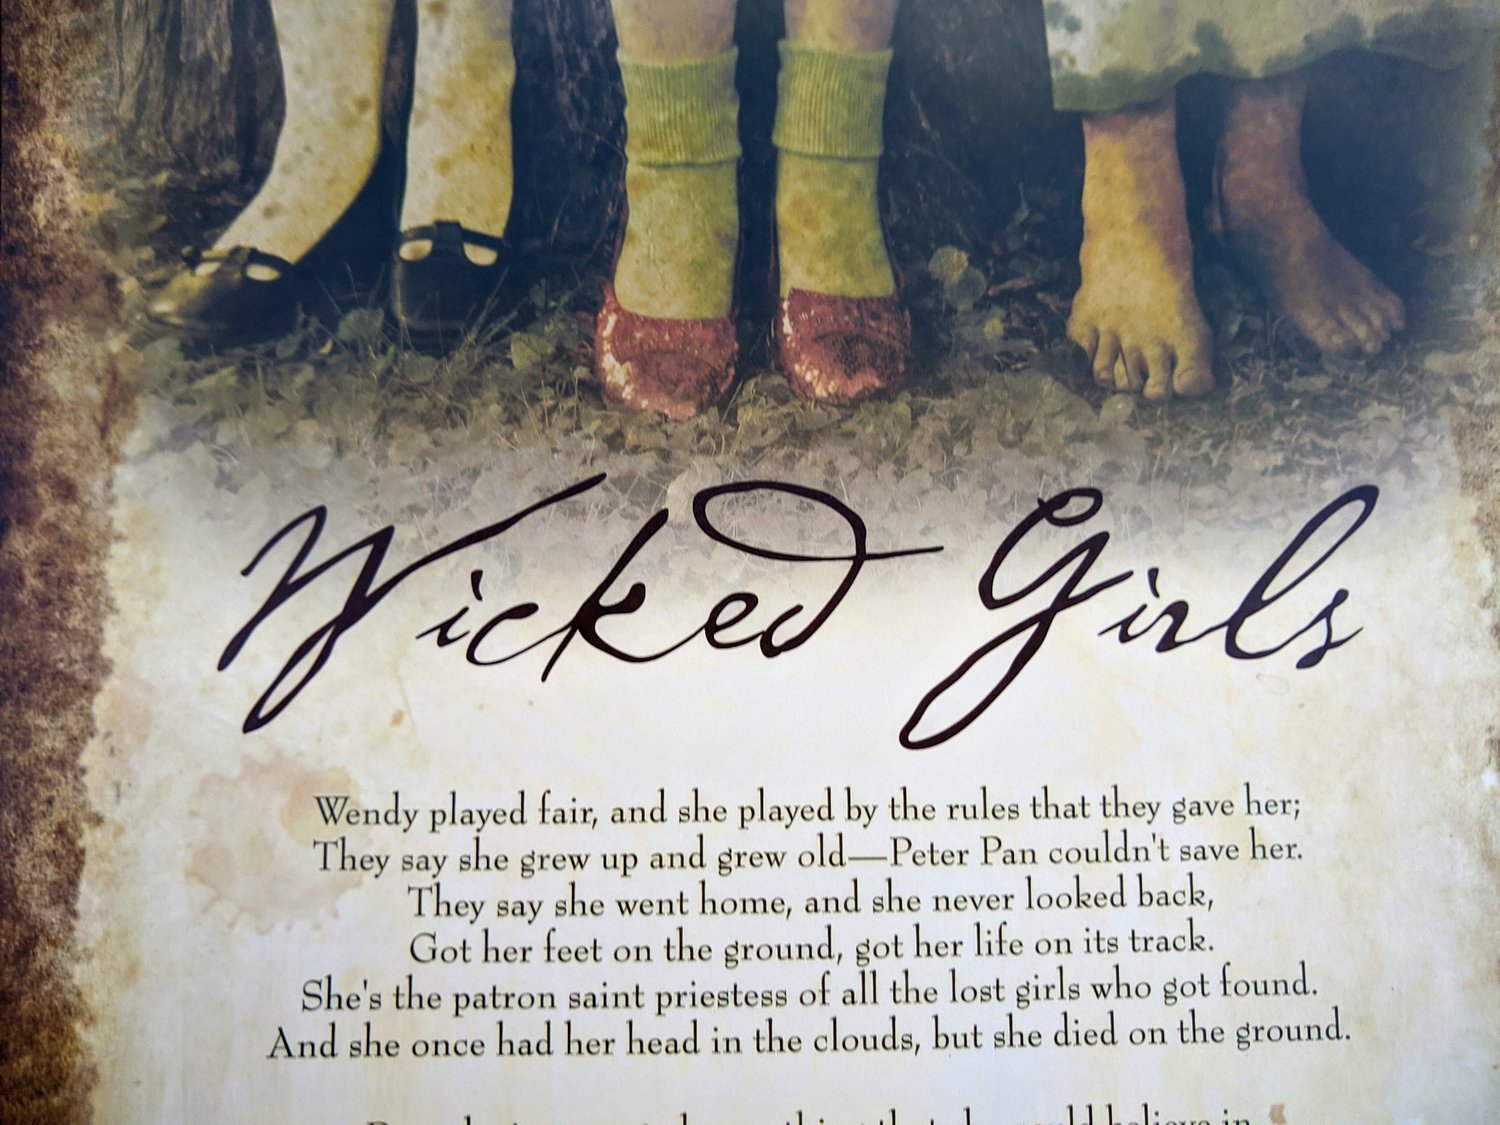 Wicked Girls Poster by Seanan McGuire